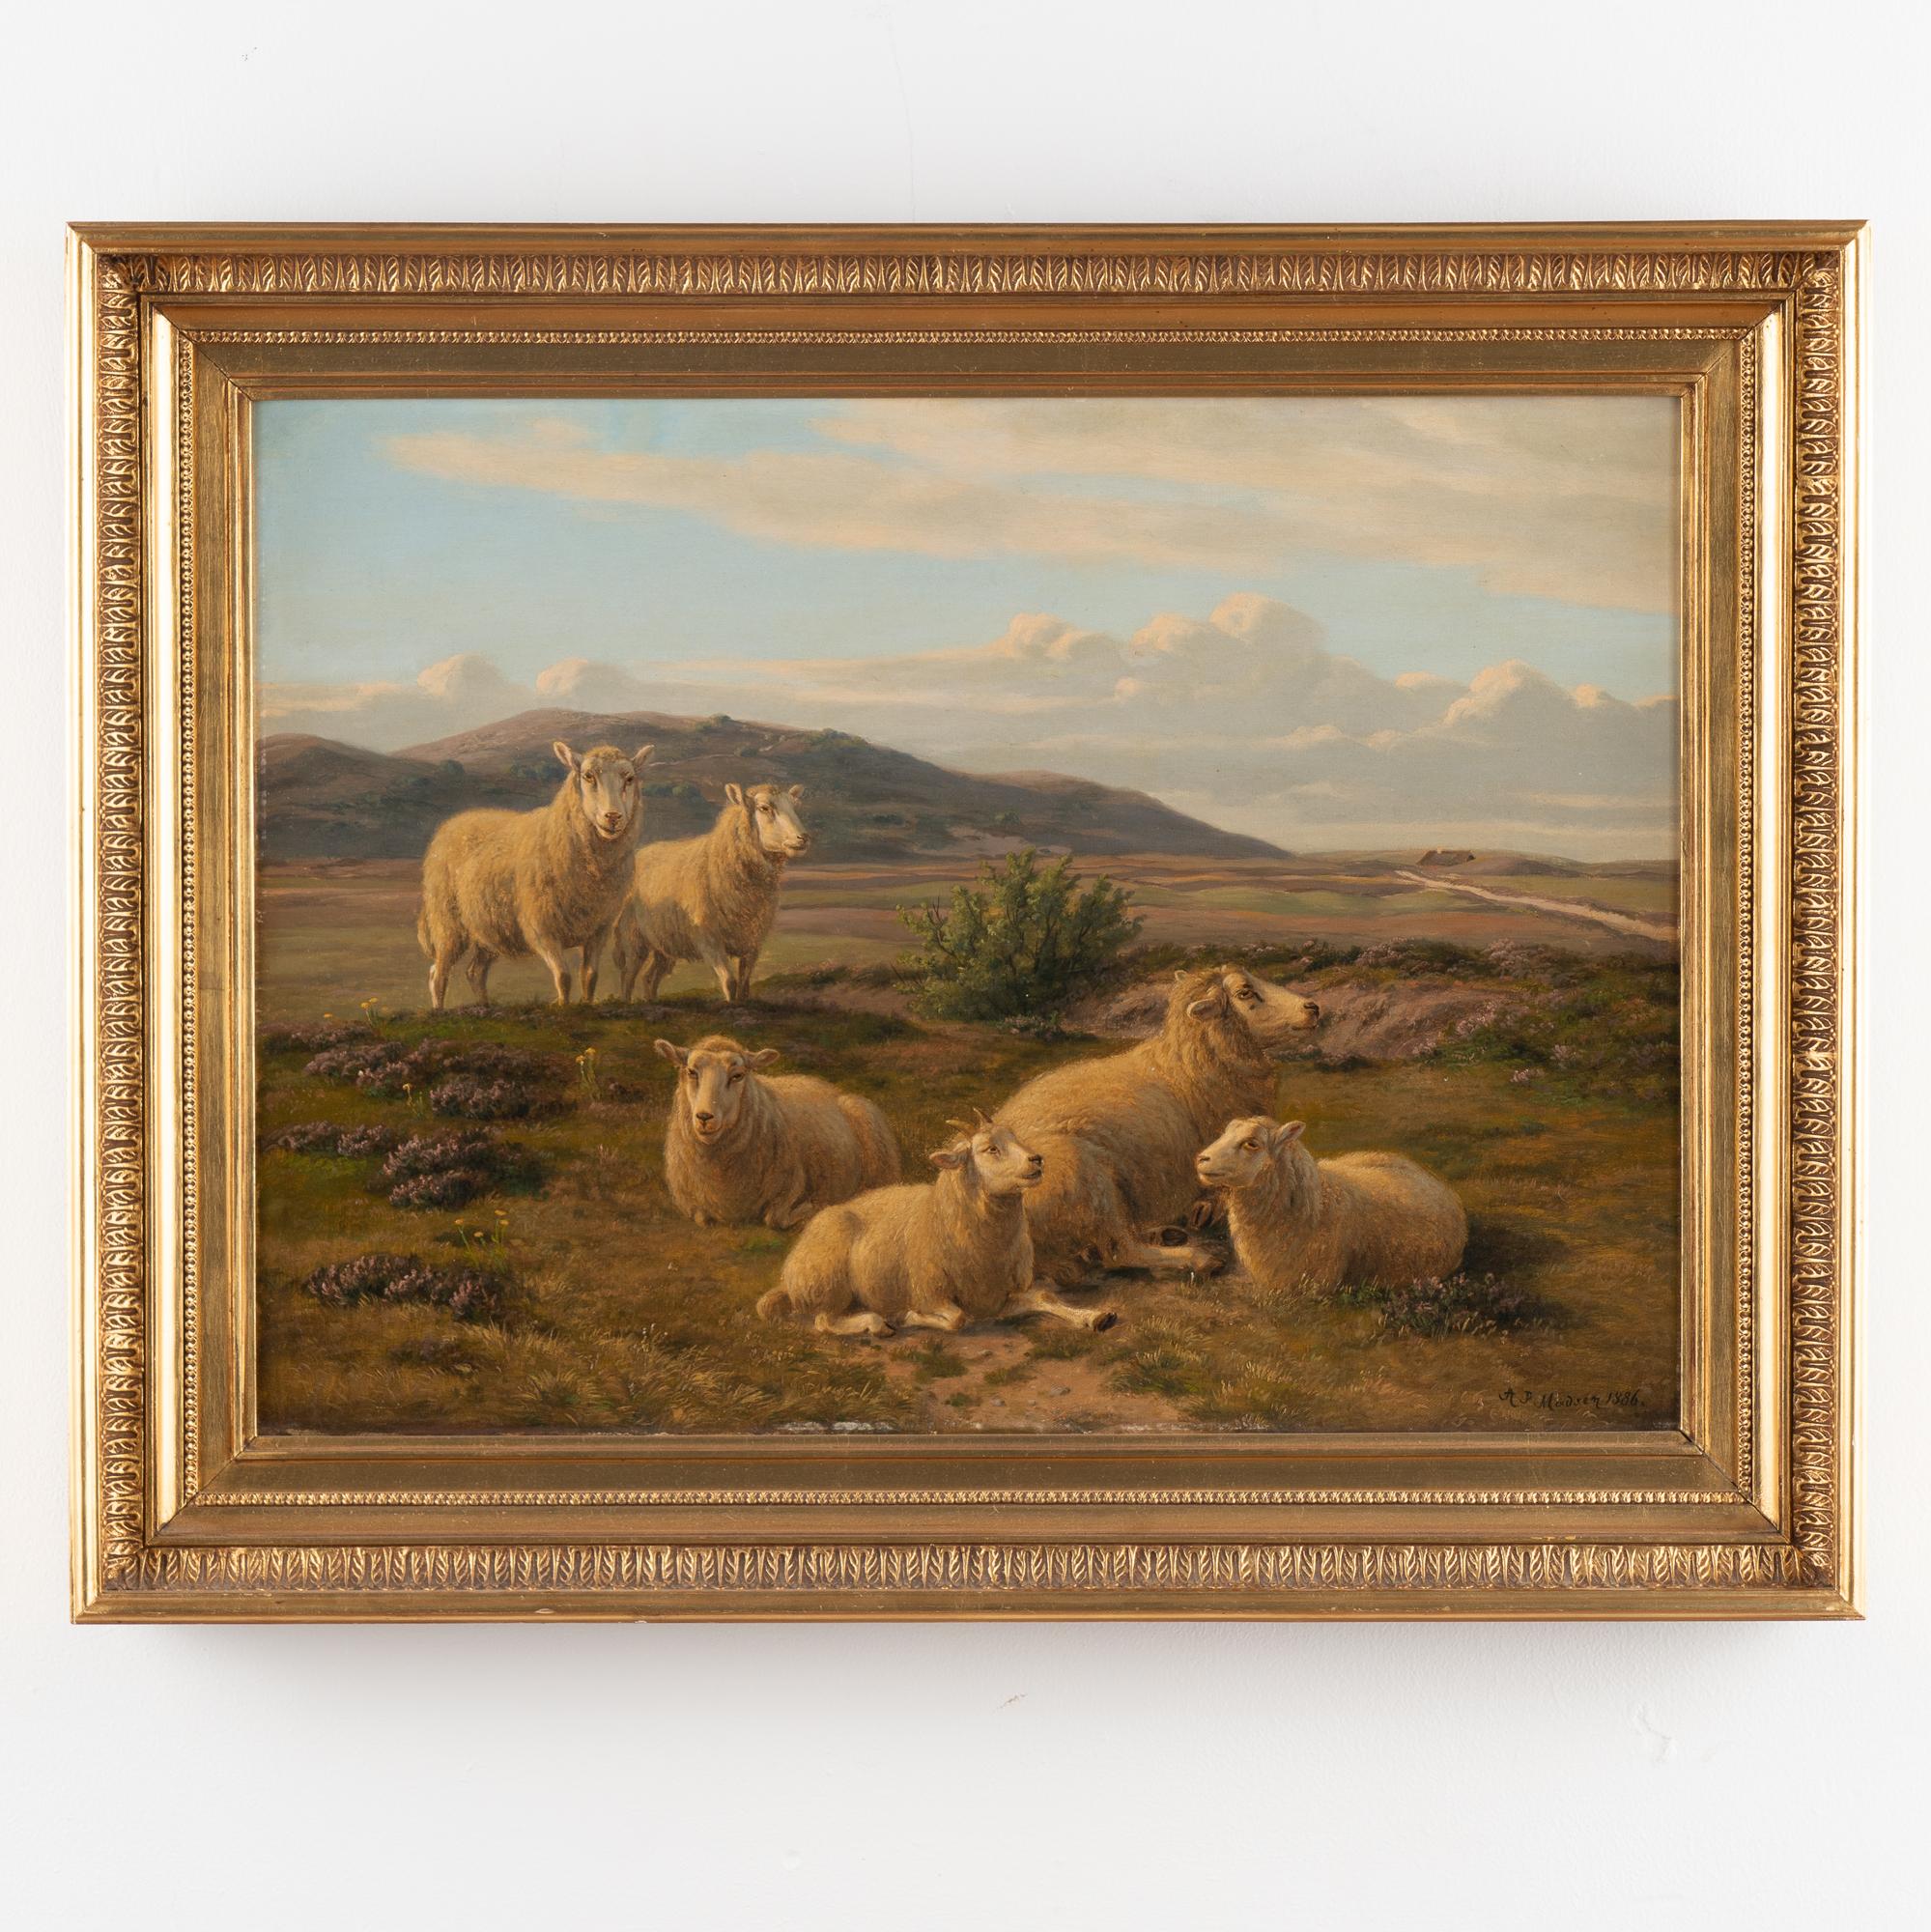 Original oil on canvas nature landscape of sheep grazing among hillside heather. 
Signed and dated 1886 by A.P. Madsen.
Canvas in very good condition for age, some scuffing of canvas around frame edges.
Measurement taken at outside of frame.
Andreas